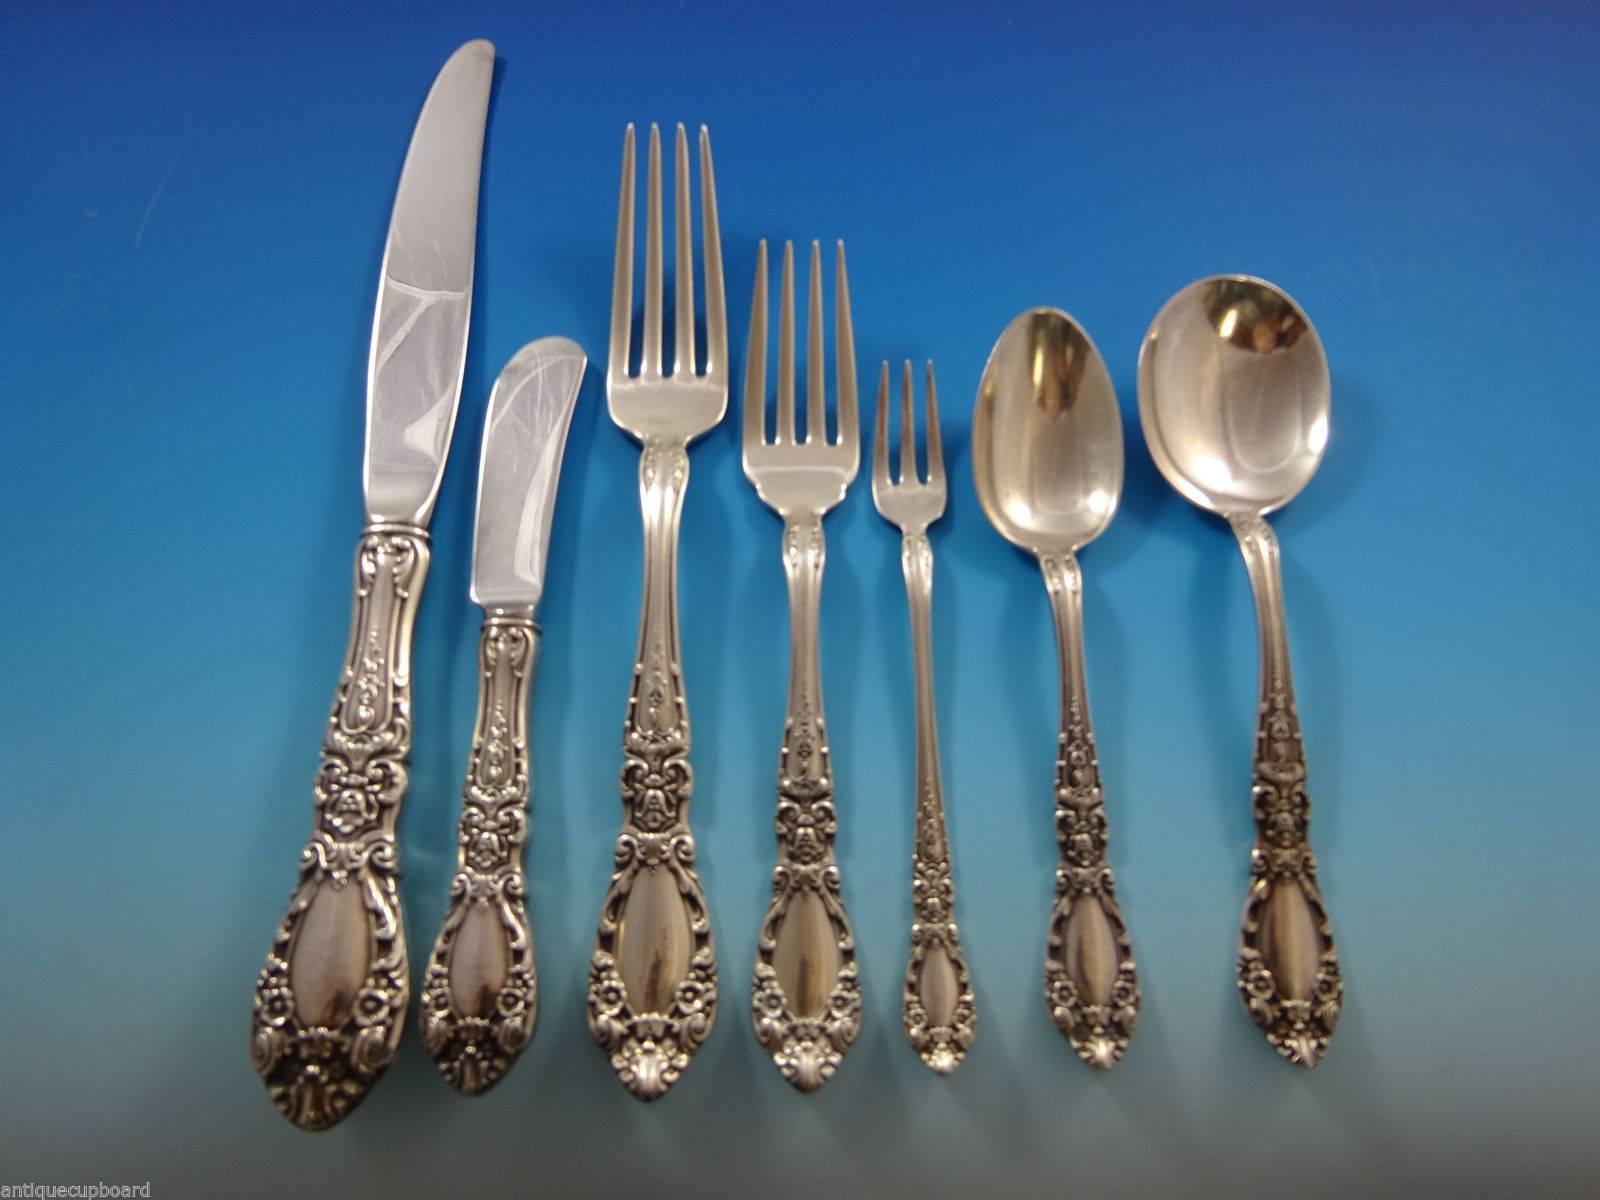 Beautiful dinner size prince Eugene by Alvin sterling silver flatware set, 61 pieces. This set includes:

Eight dinner size knives, 9 1/2